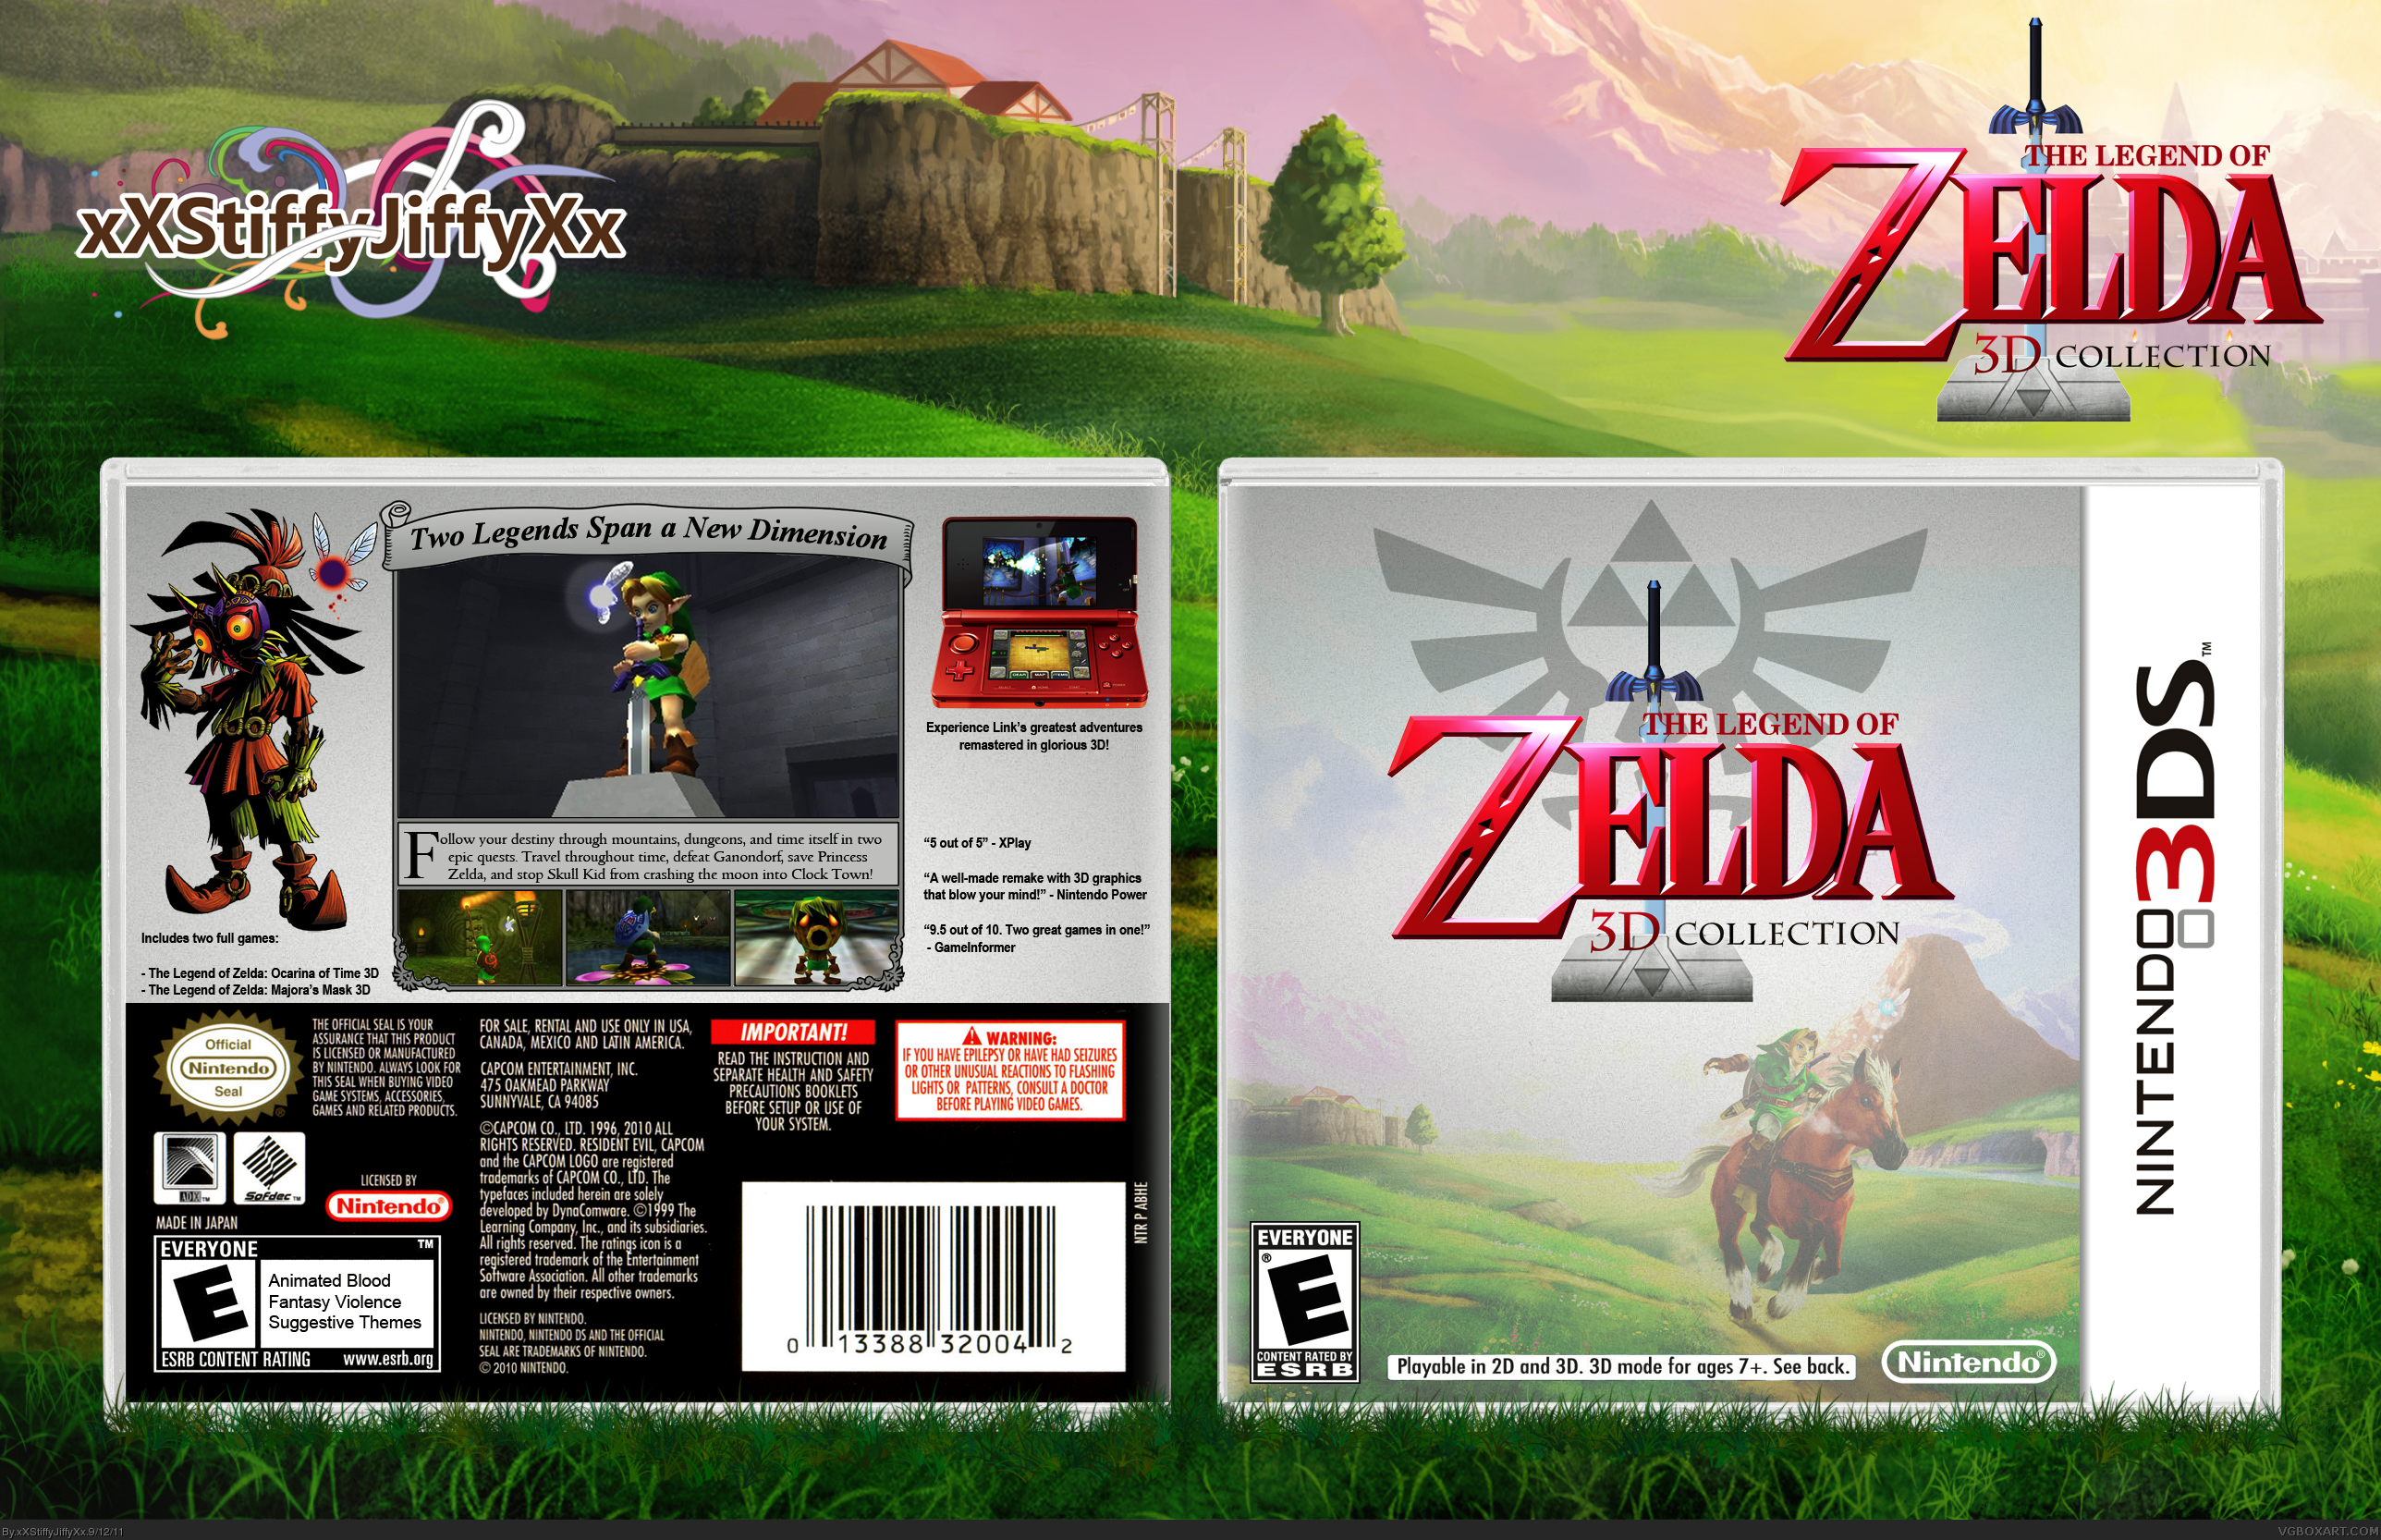 The Legend of Zelda: 3D Collection box cover